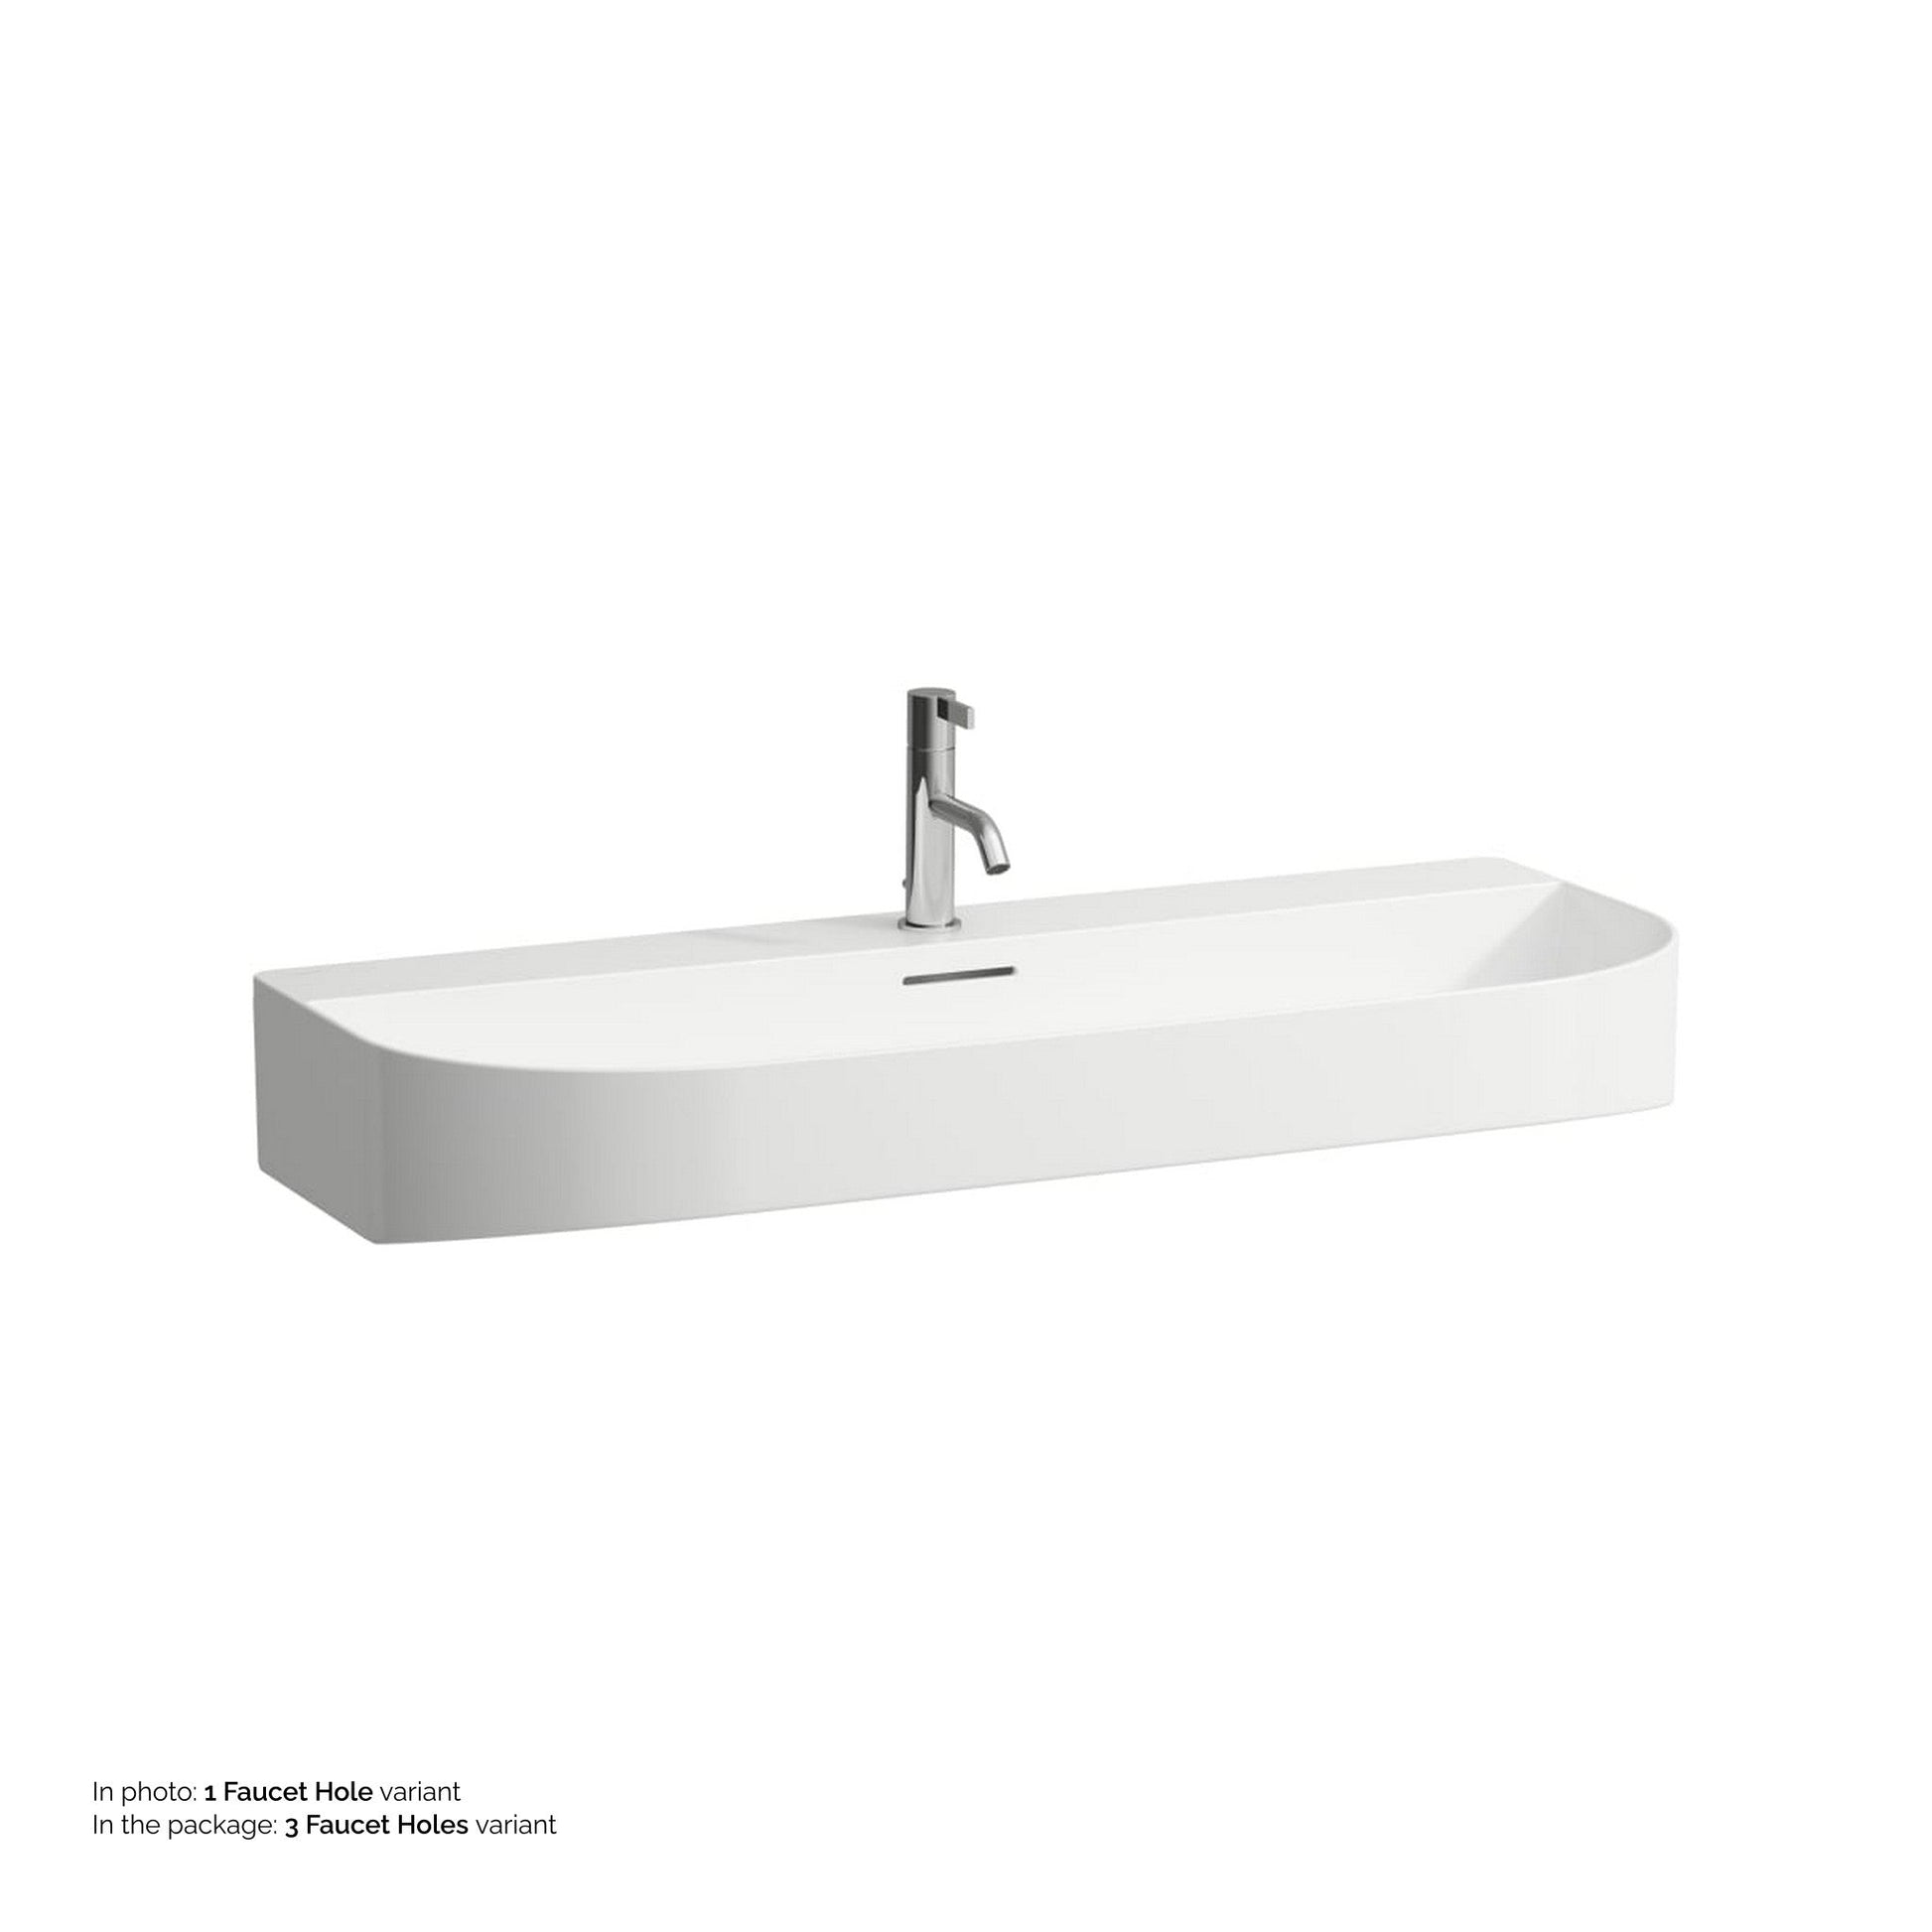 Laufen Sonar 39" Matte White Ceramic Wall-Mounted Bathroom Sink With 8" Spread 3 Faucet Holes